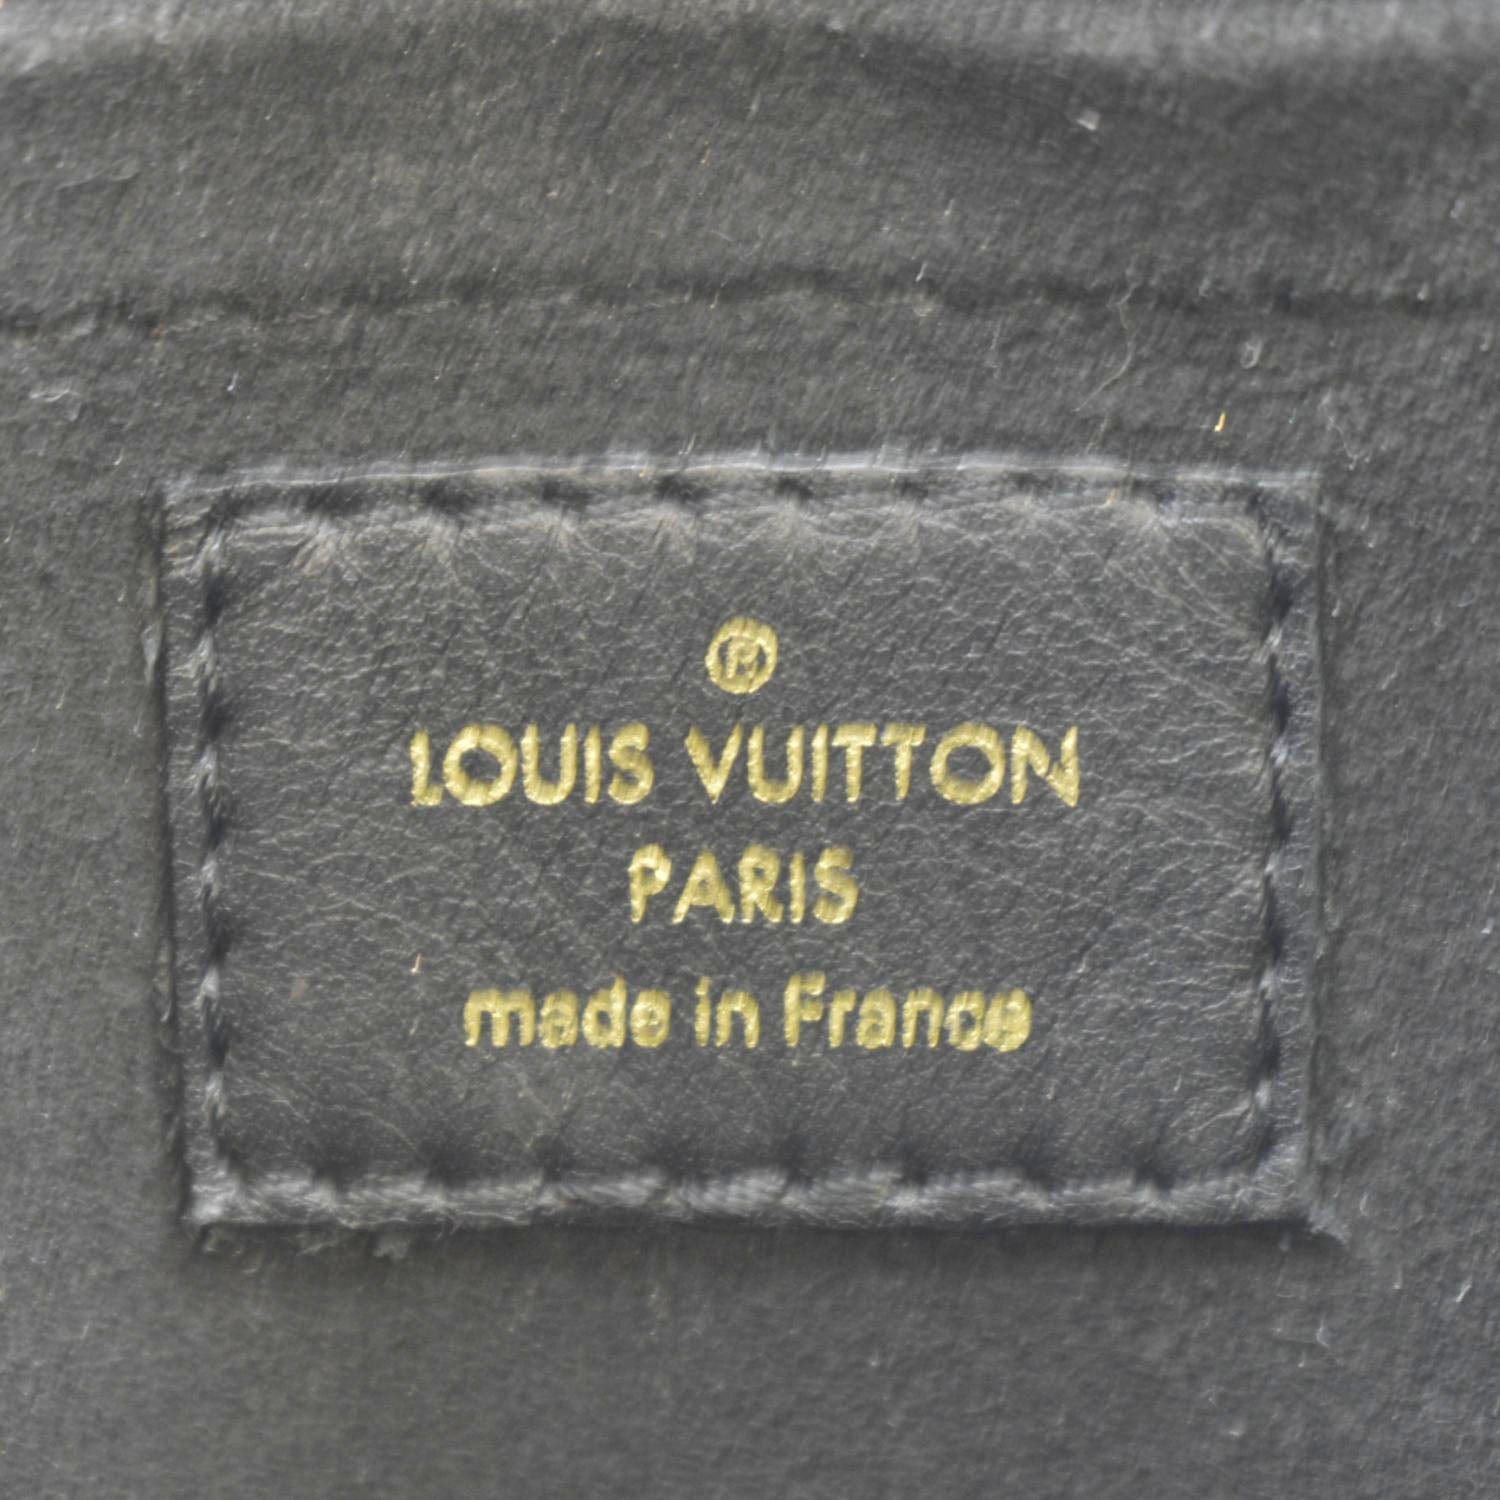 What Type Of Leather Is Louis Vuitton Made Of